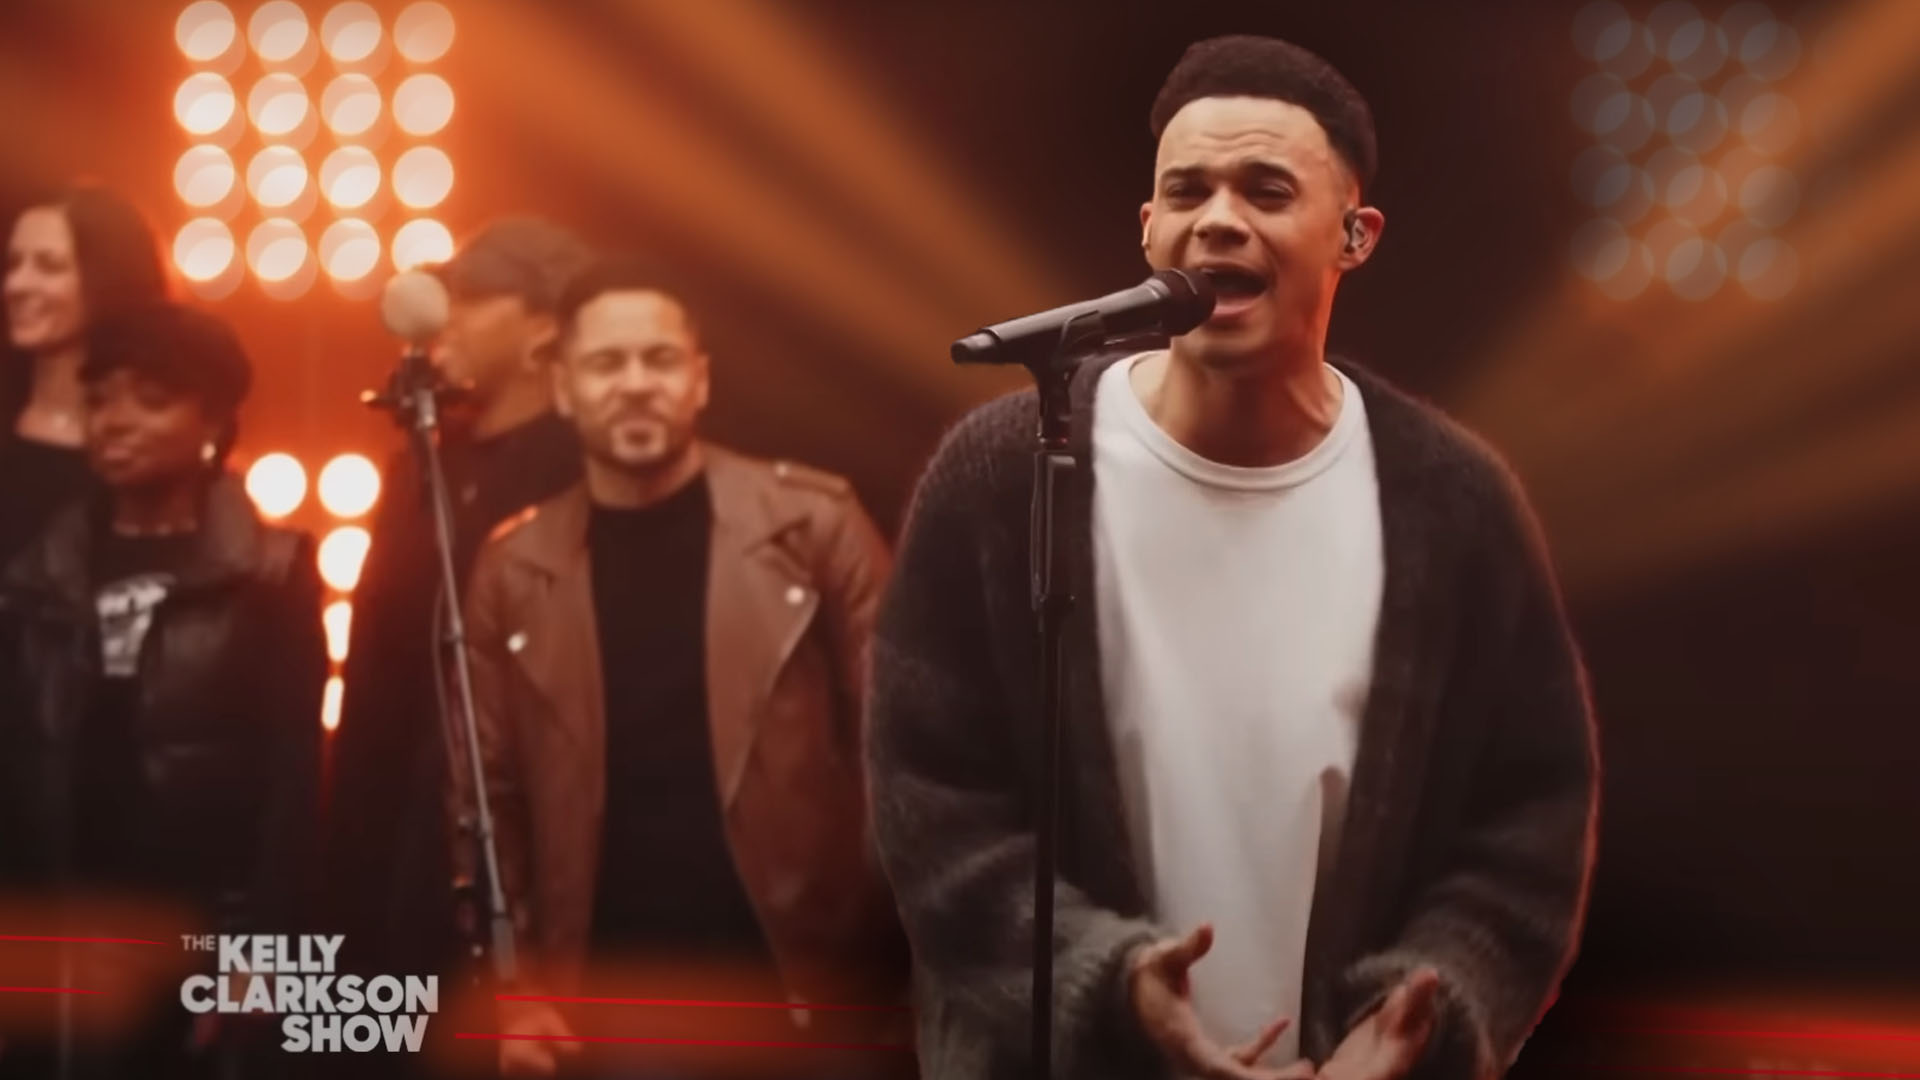 Tauren Wells "Joy Comes In the Morning" Kelly Clarkson Show